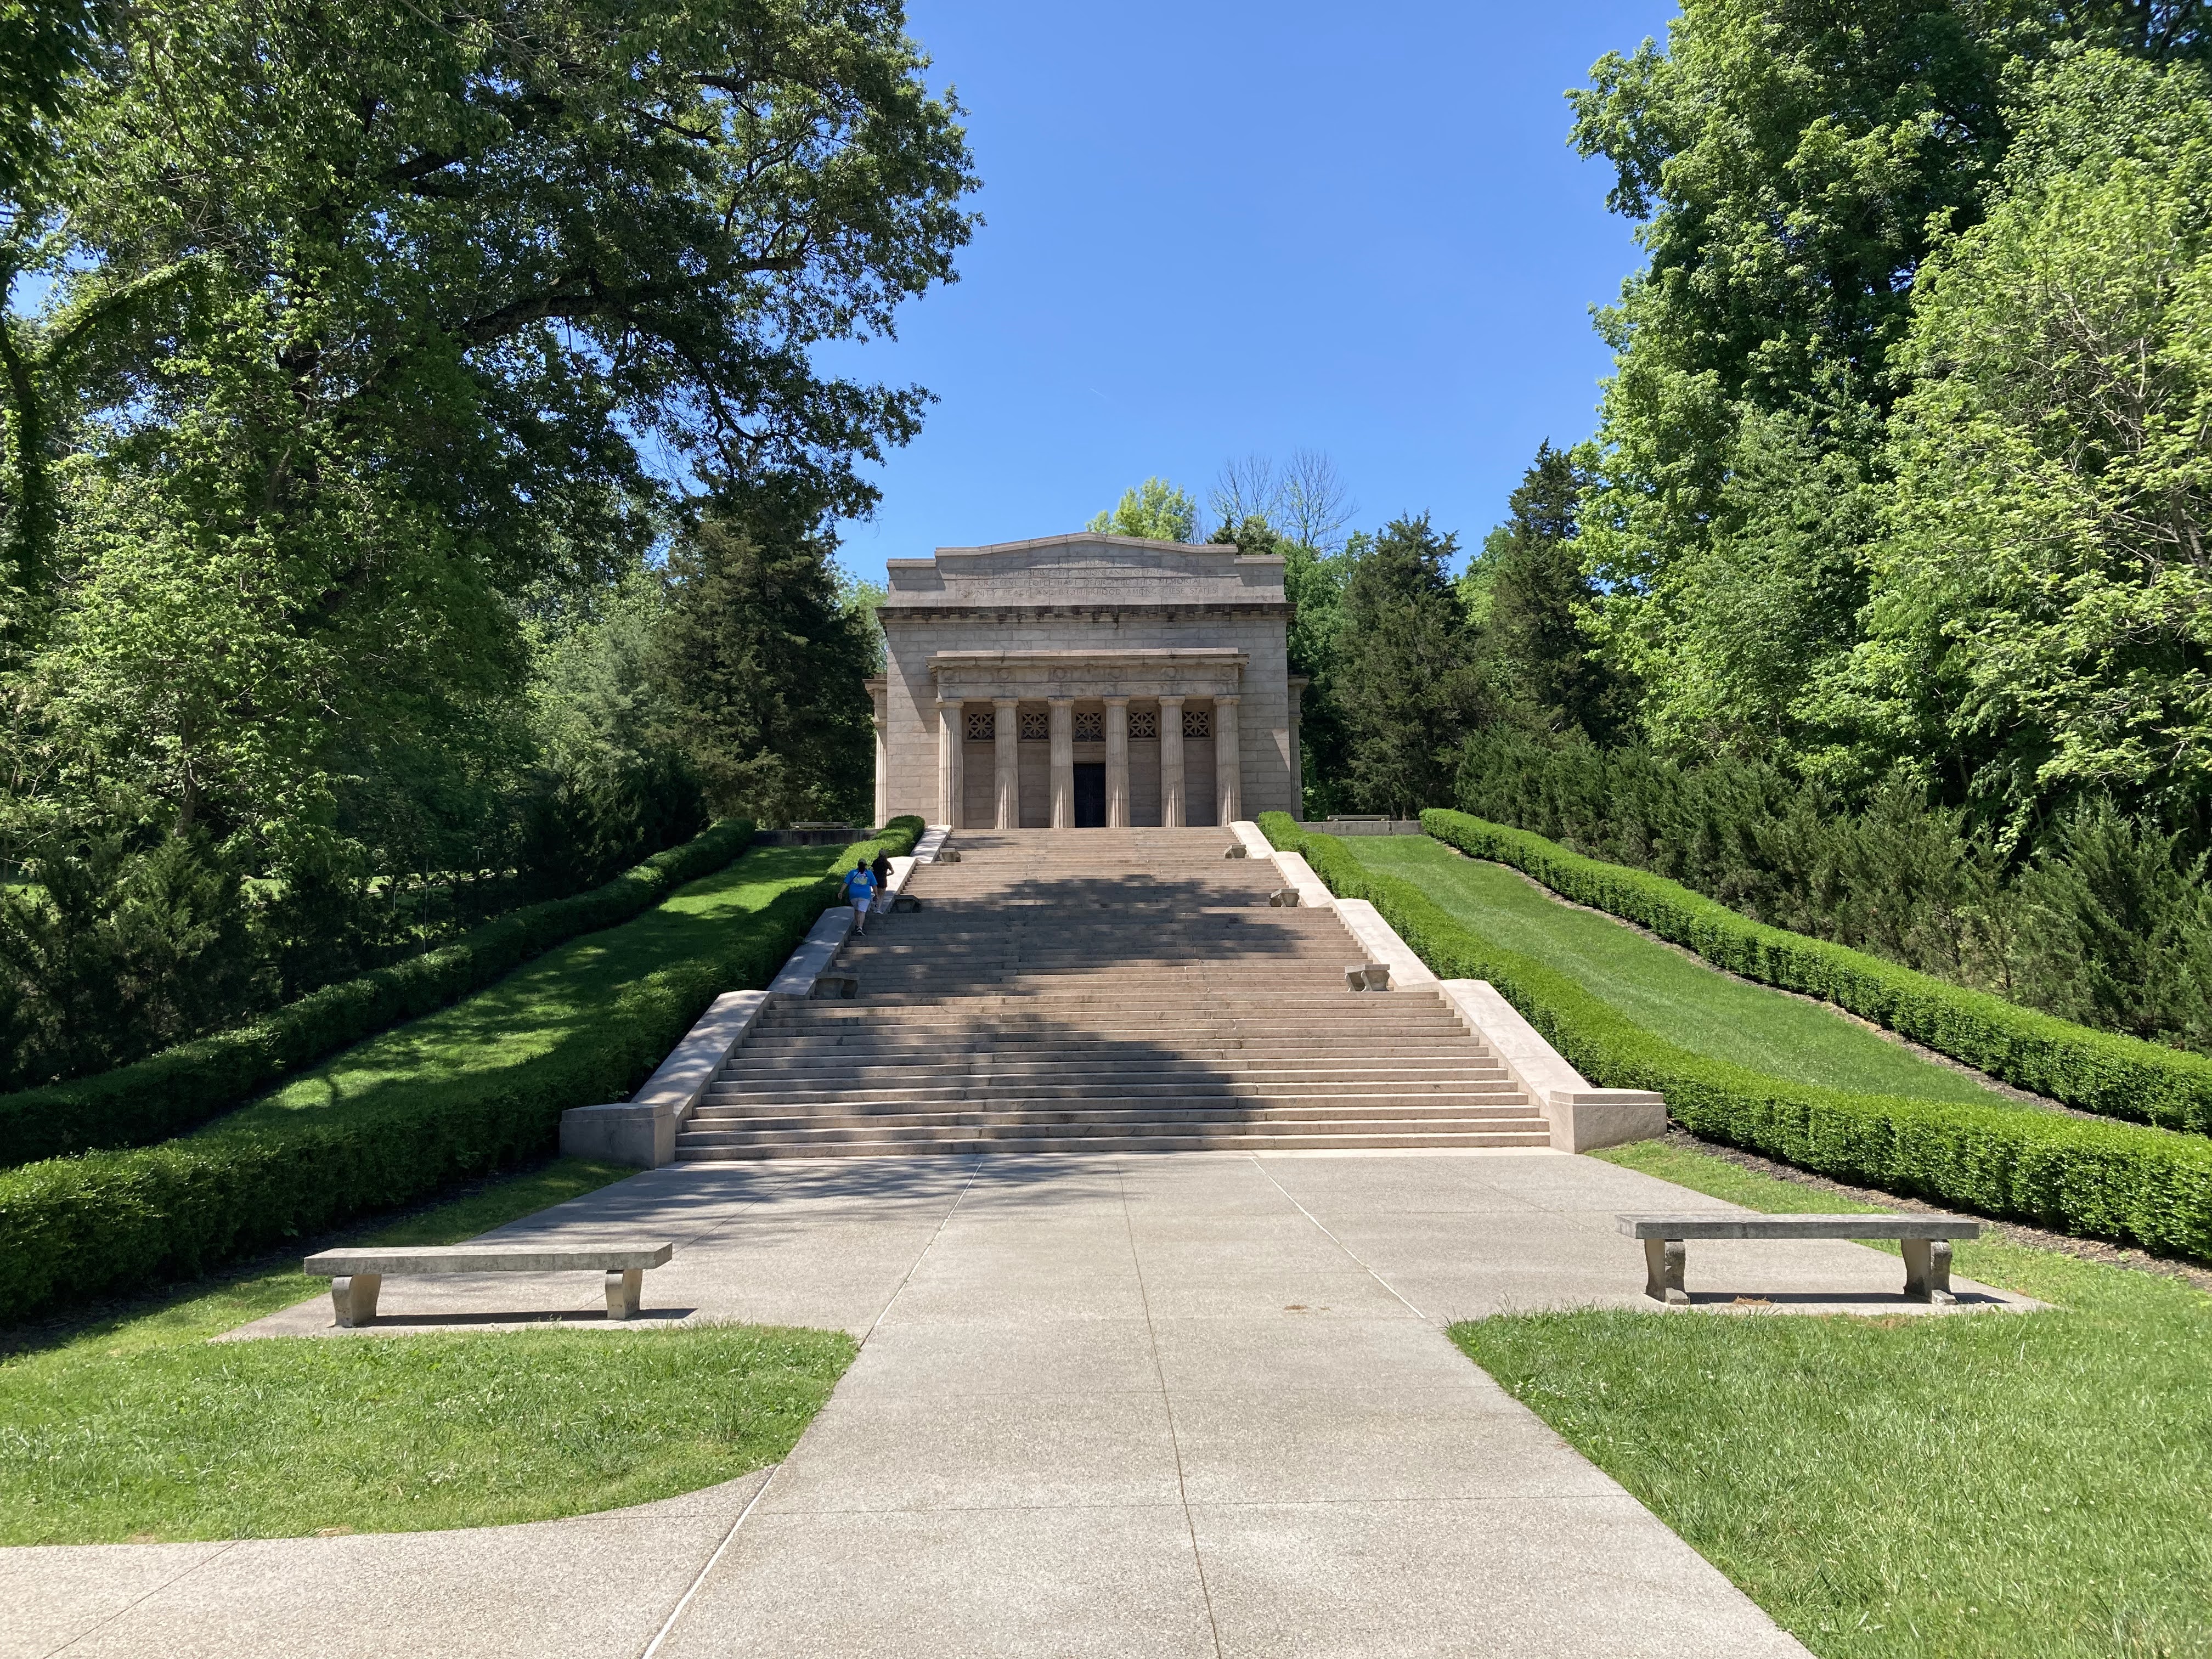 Picture of a place: Abraham Lincoln Birthplace National Historical Park